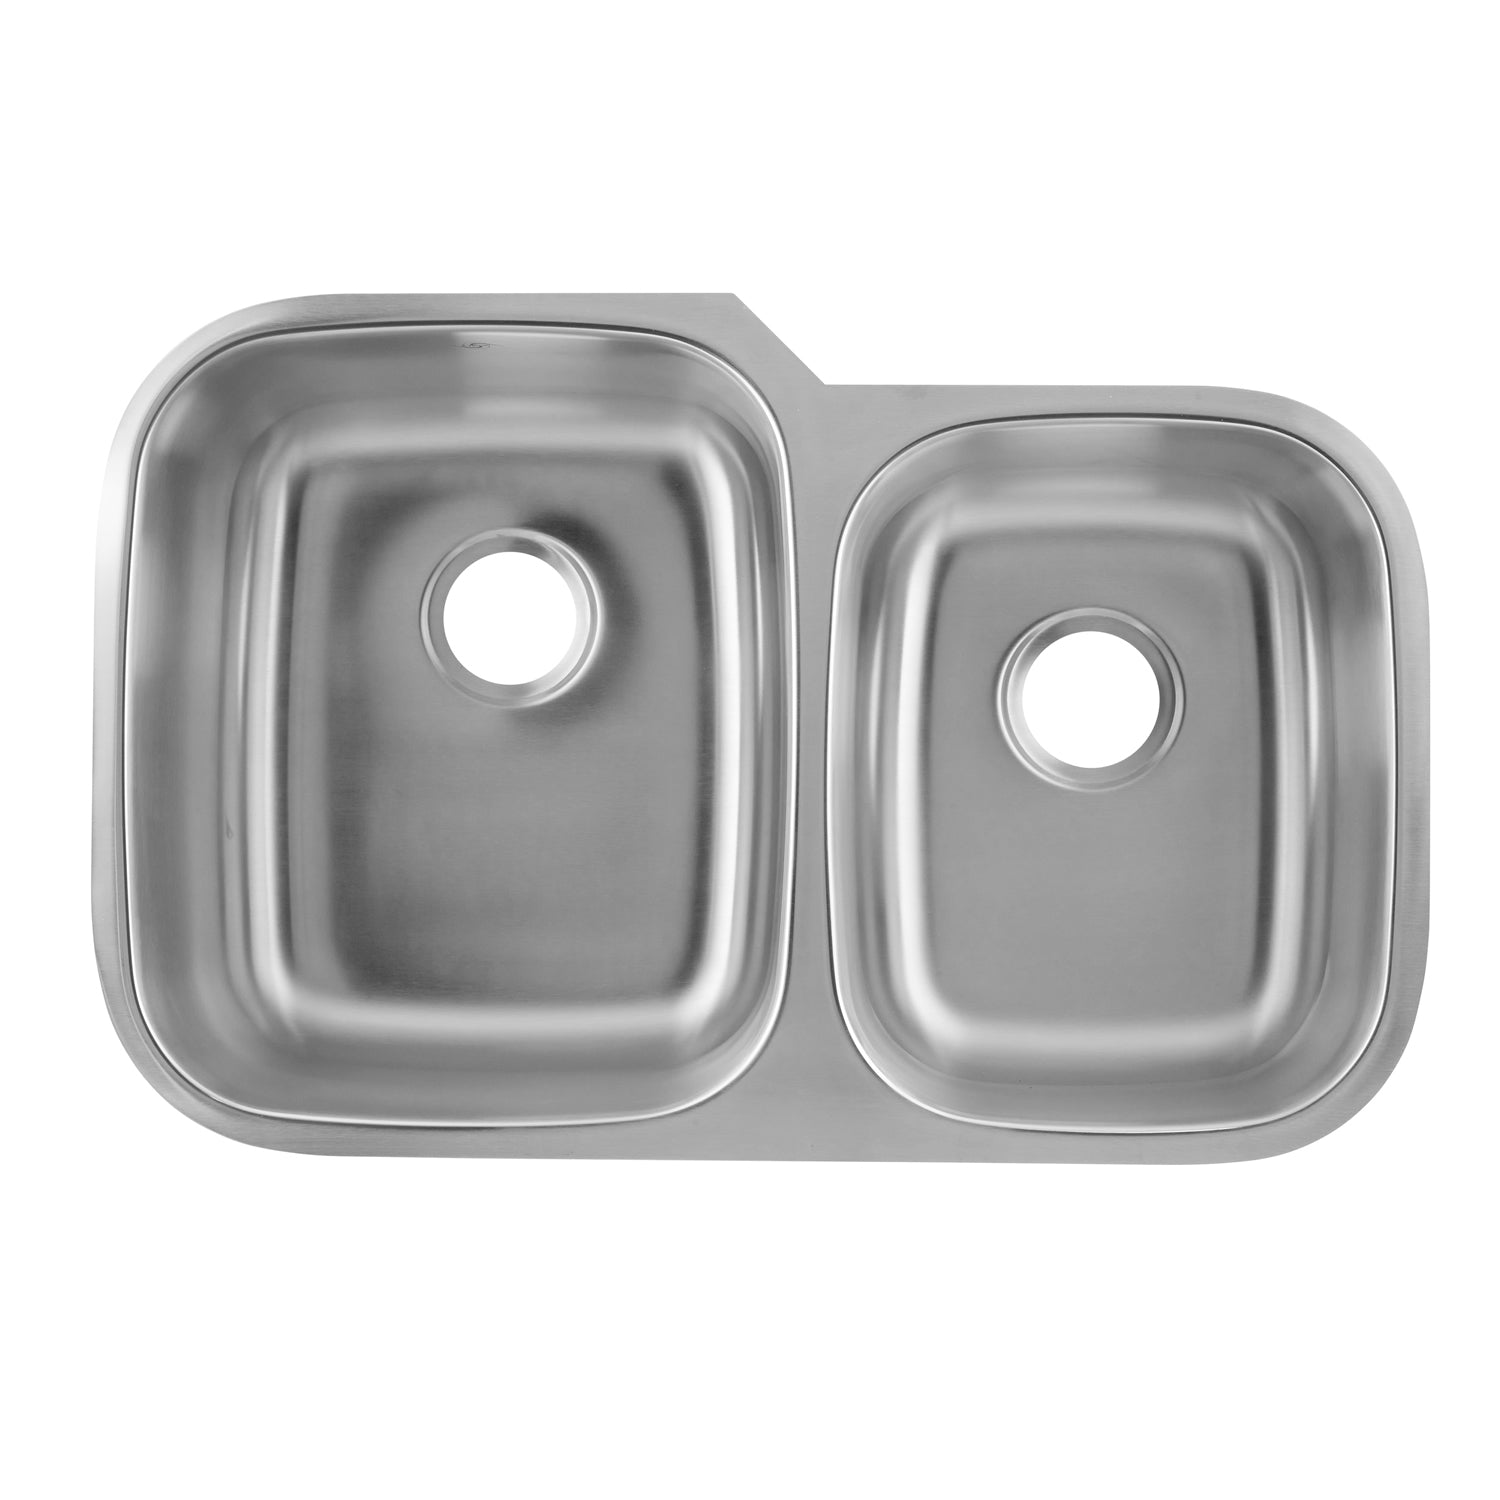 DAX 60/40 Double Bowl Undermount Kitchen Sink, 18 Gauge Stainless Steel, Brushed Finish , 32 x 24-3/4 x 9 Inches (DAX-3120L)